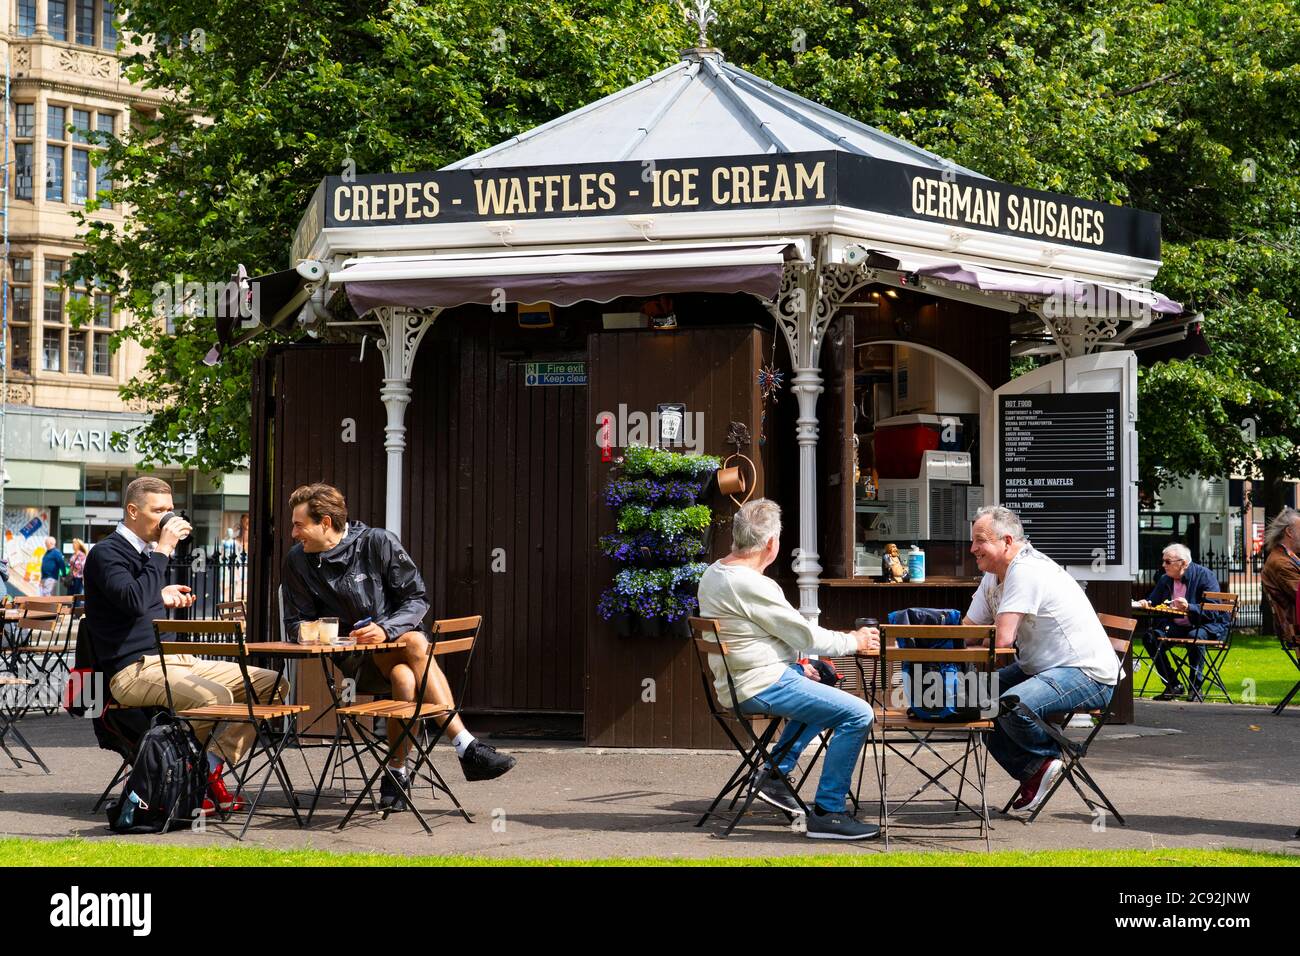 Edinburgh, Scotland, UK. 28 July, 2020. Business and tourism slowly returning to the shops and streets of Edinburgh city centre. The public returning to enjoy cafe inside East Princes Street Gardens which have recently reopened after landscaping and drainage improvement works. Iain Masterton/Alamy Live News Stock Photo